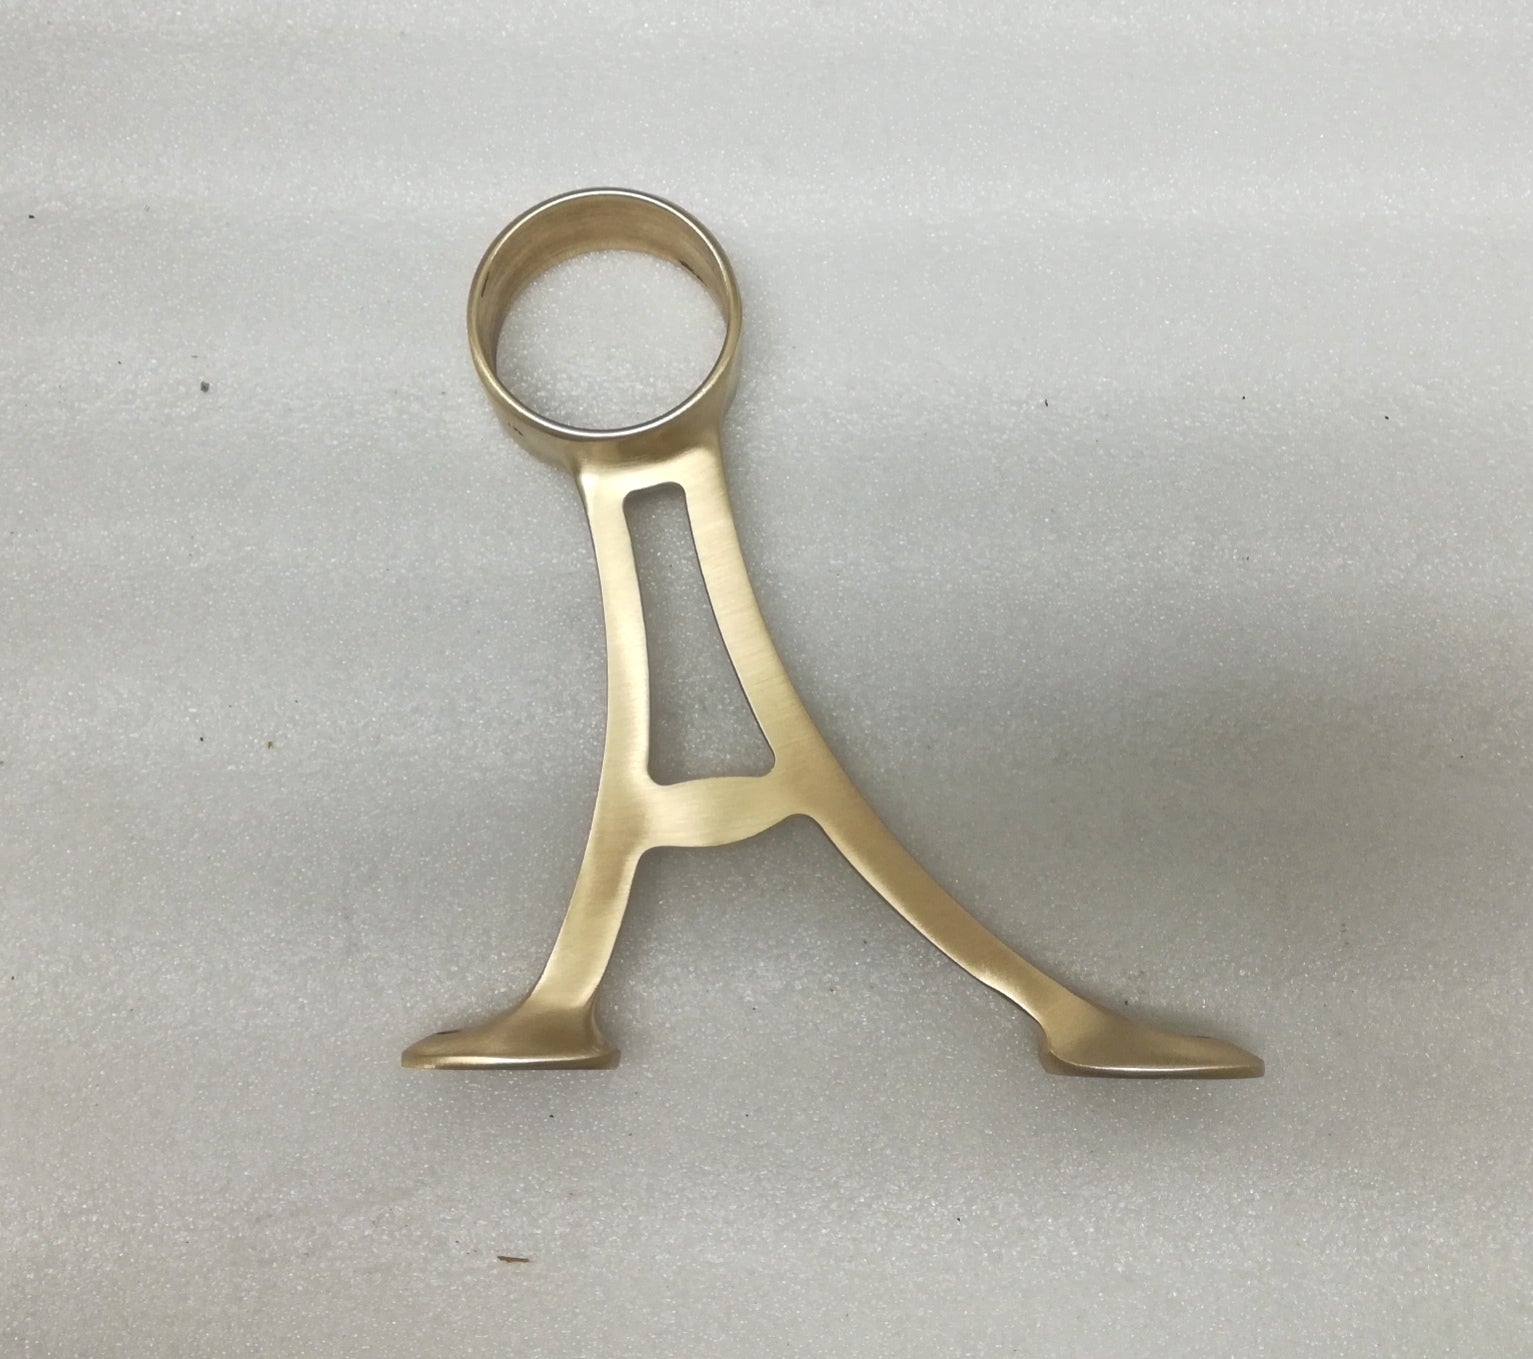 1 Diameter X .050 Wall Solid Polished Brass Tubing